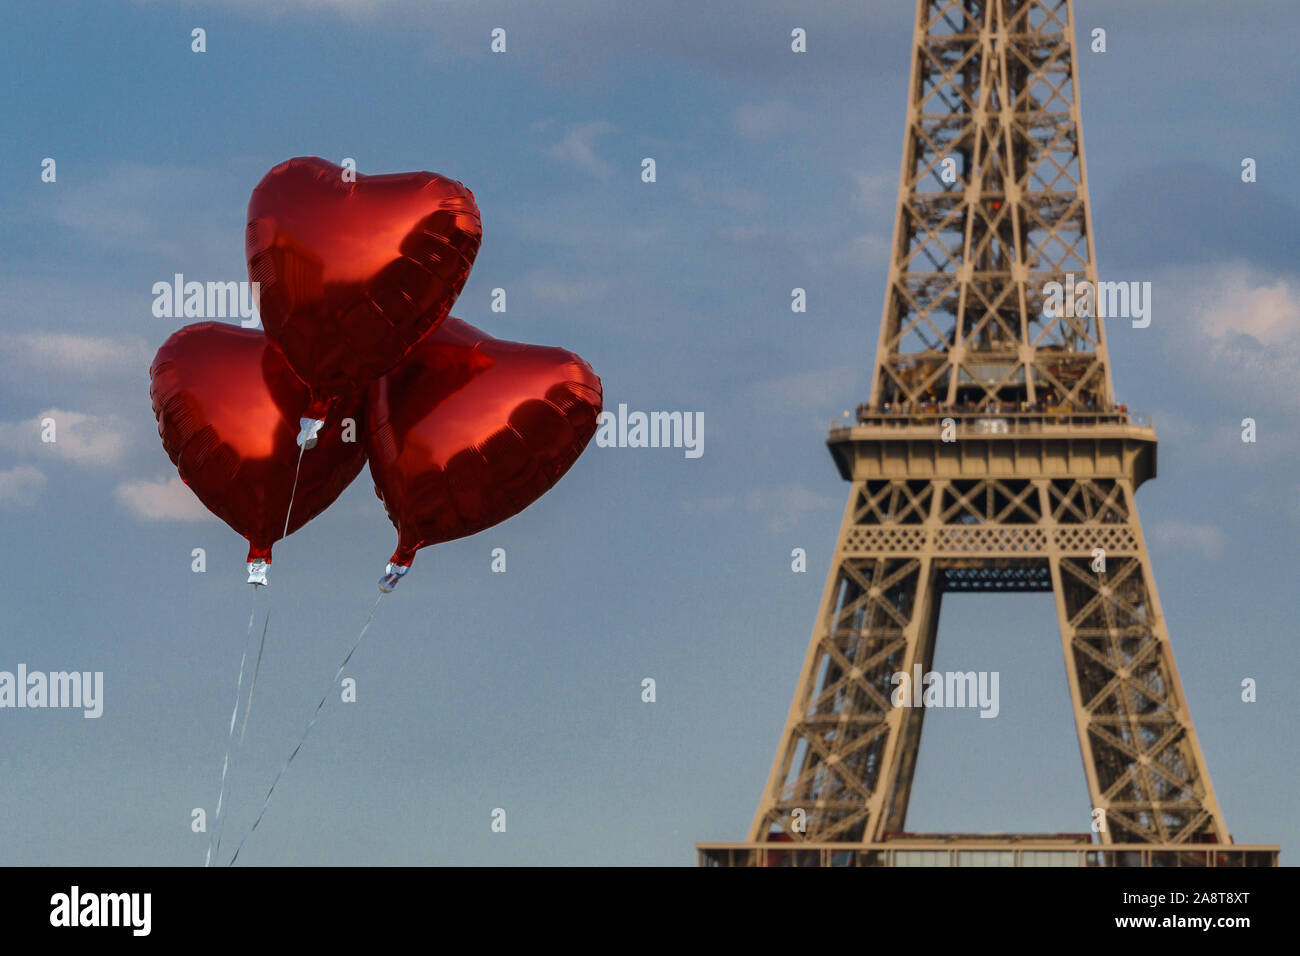 Heart shaped metallic red balloons in front of the eiffel tower with blue sky and some fluffy clouds Stock Photo